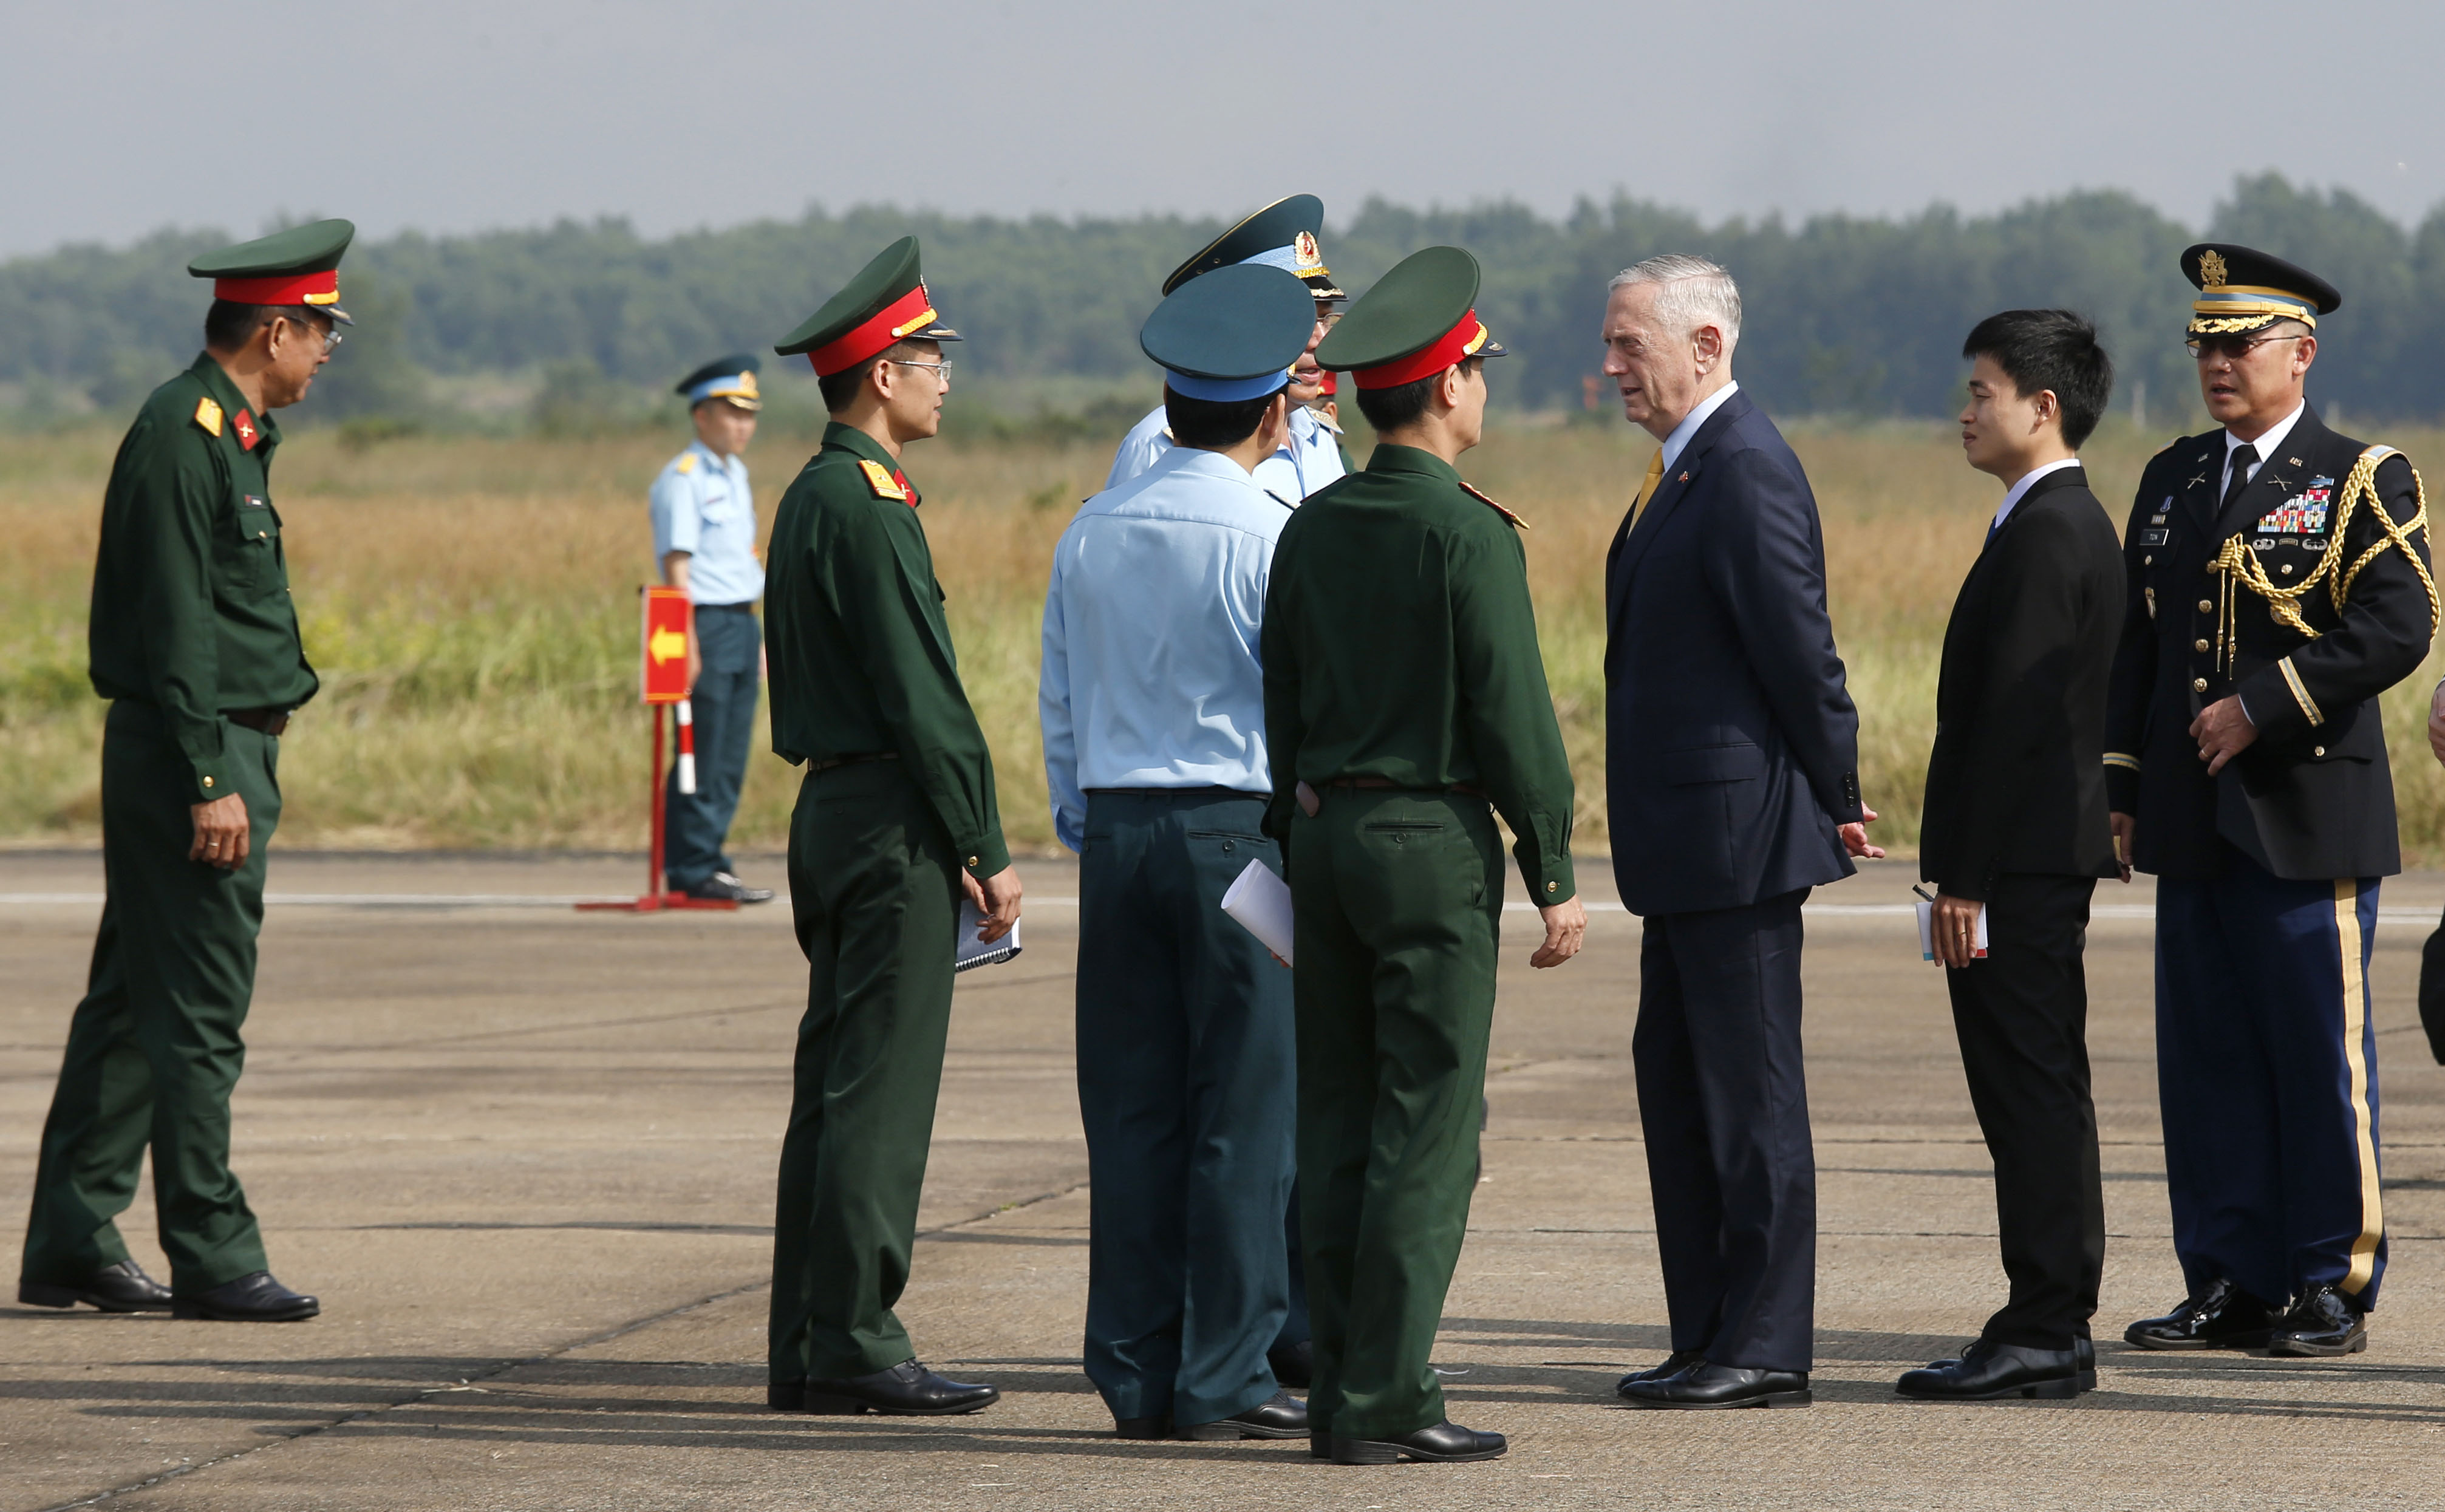 U.S. Defense Secretary Jim Mattis talks to Vietnamese military officials as he visits Bien Hoa airbase, where the US army stored the defoliant Agent Orange during the Vietnam War, in Bien Hoa city, on the outskirts of Ho Chi Minh city, on October 17, 2018. (KHAM&mdash;AFP/Getty Images)